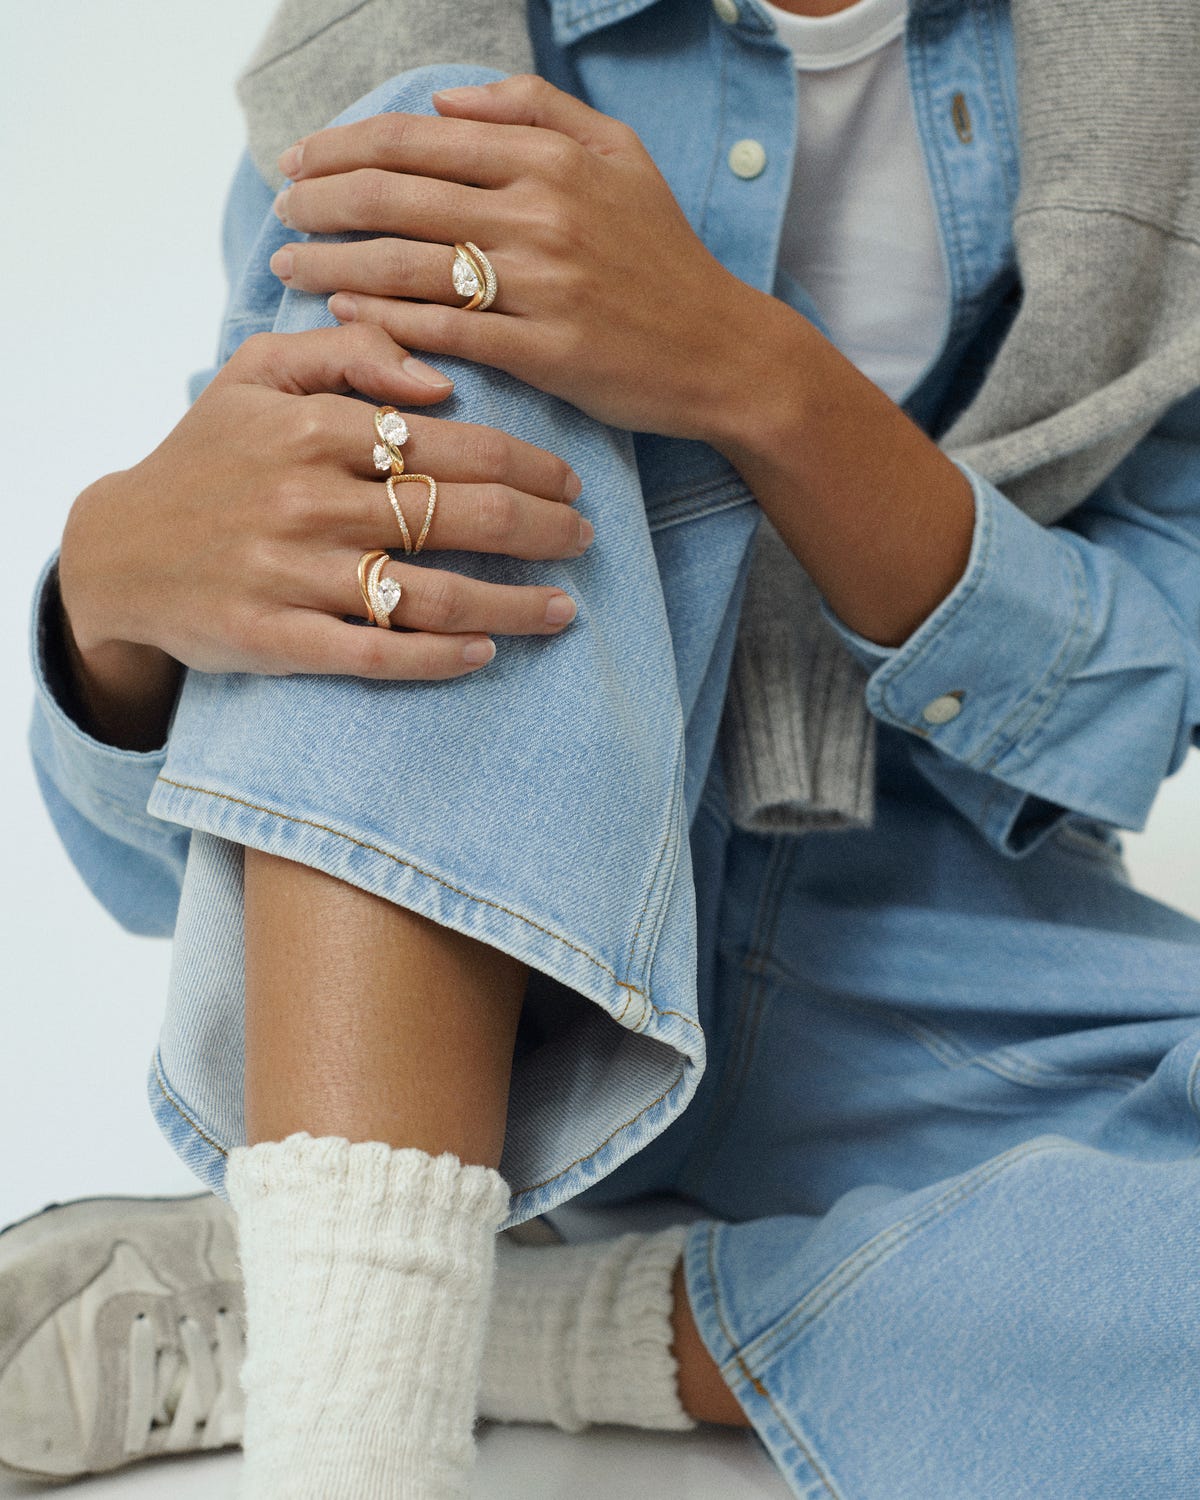 72 Of The Best Jewellery Brands For Those Who Want To Frost Themselves